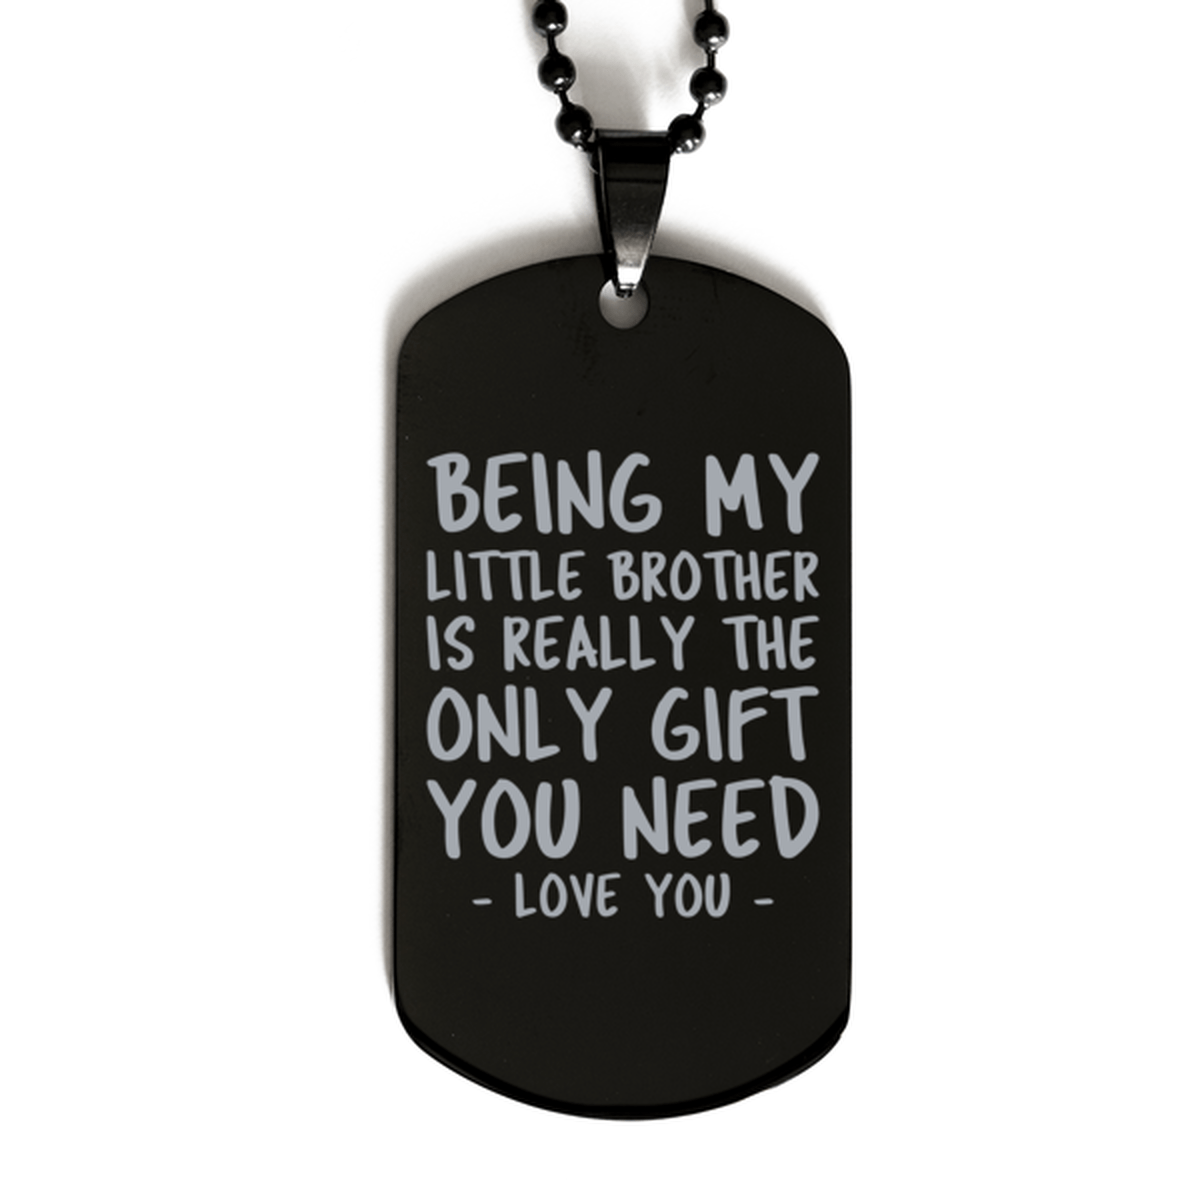 Funny Little Brother Black Dog Tag Necklace, Being My Little Brother Is Really the Only Gift You Need, Best Birthday Gifts for Little Brother